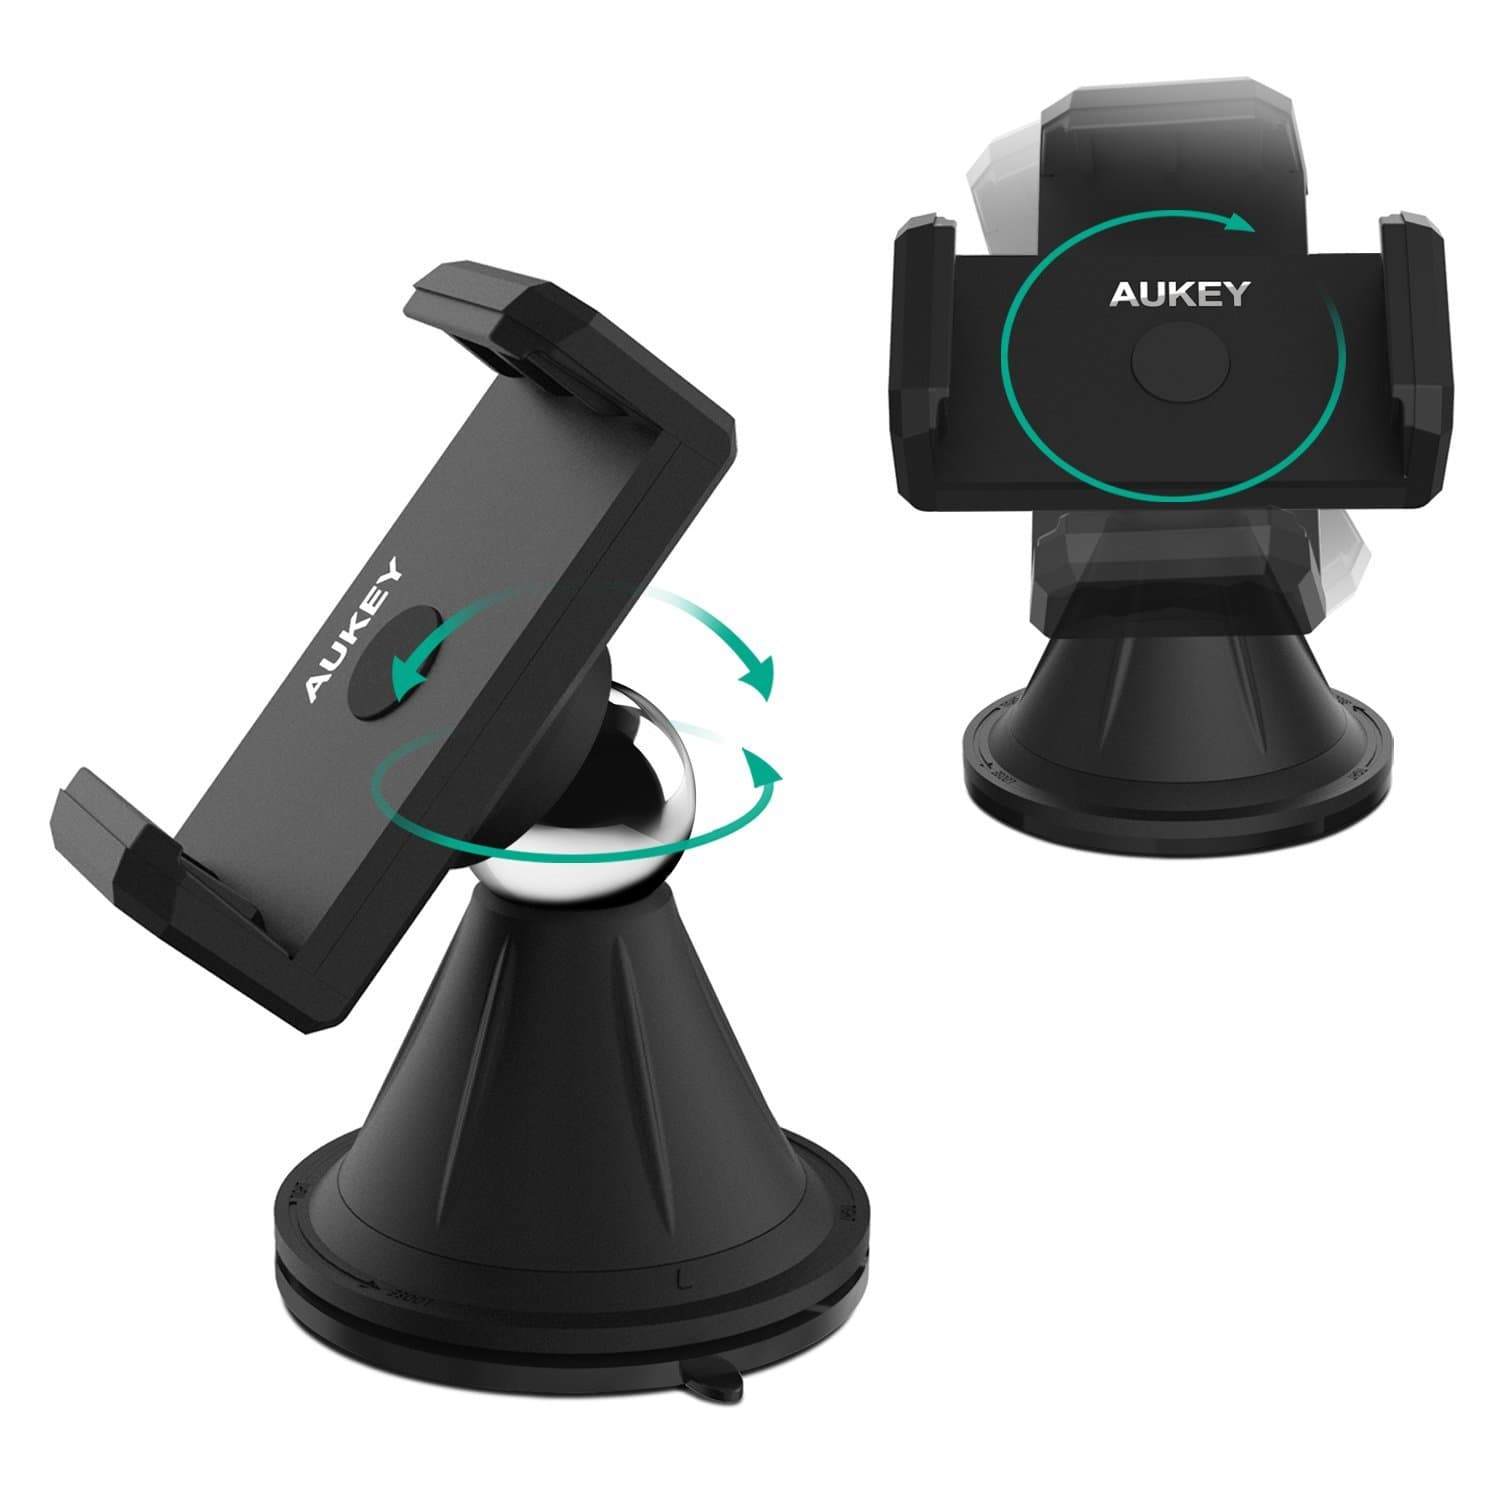 AUKEY HD-C18 Windshield Dashboard Car Mount Holder - Aukey Malaysia Official Store